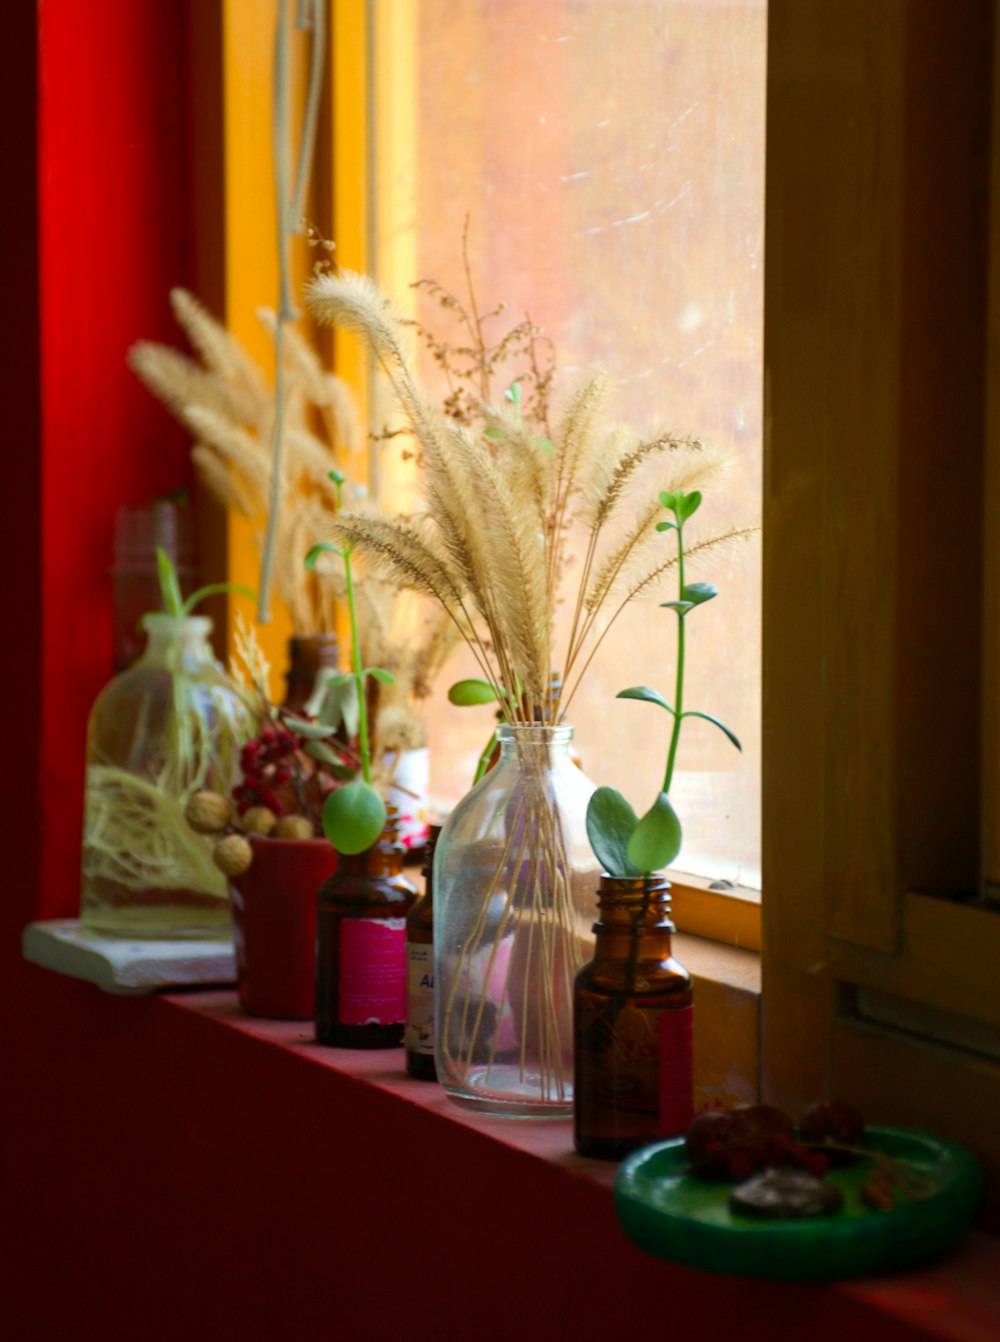 a window sill filled with vases filled with flowers